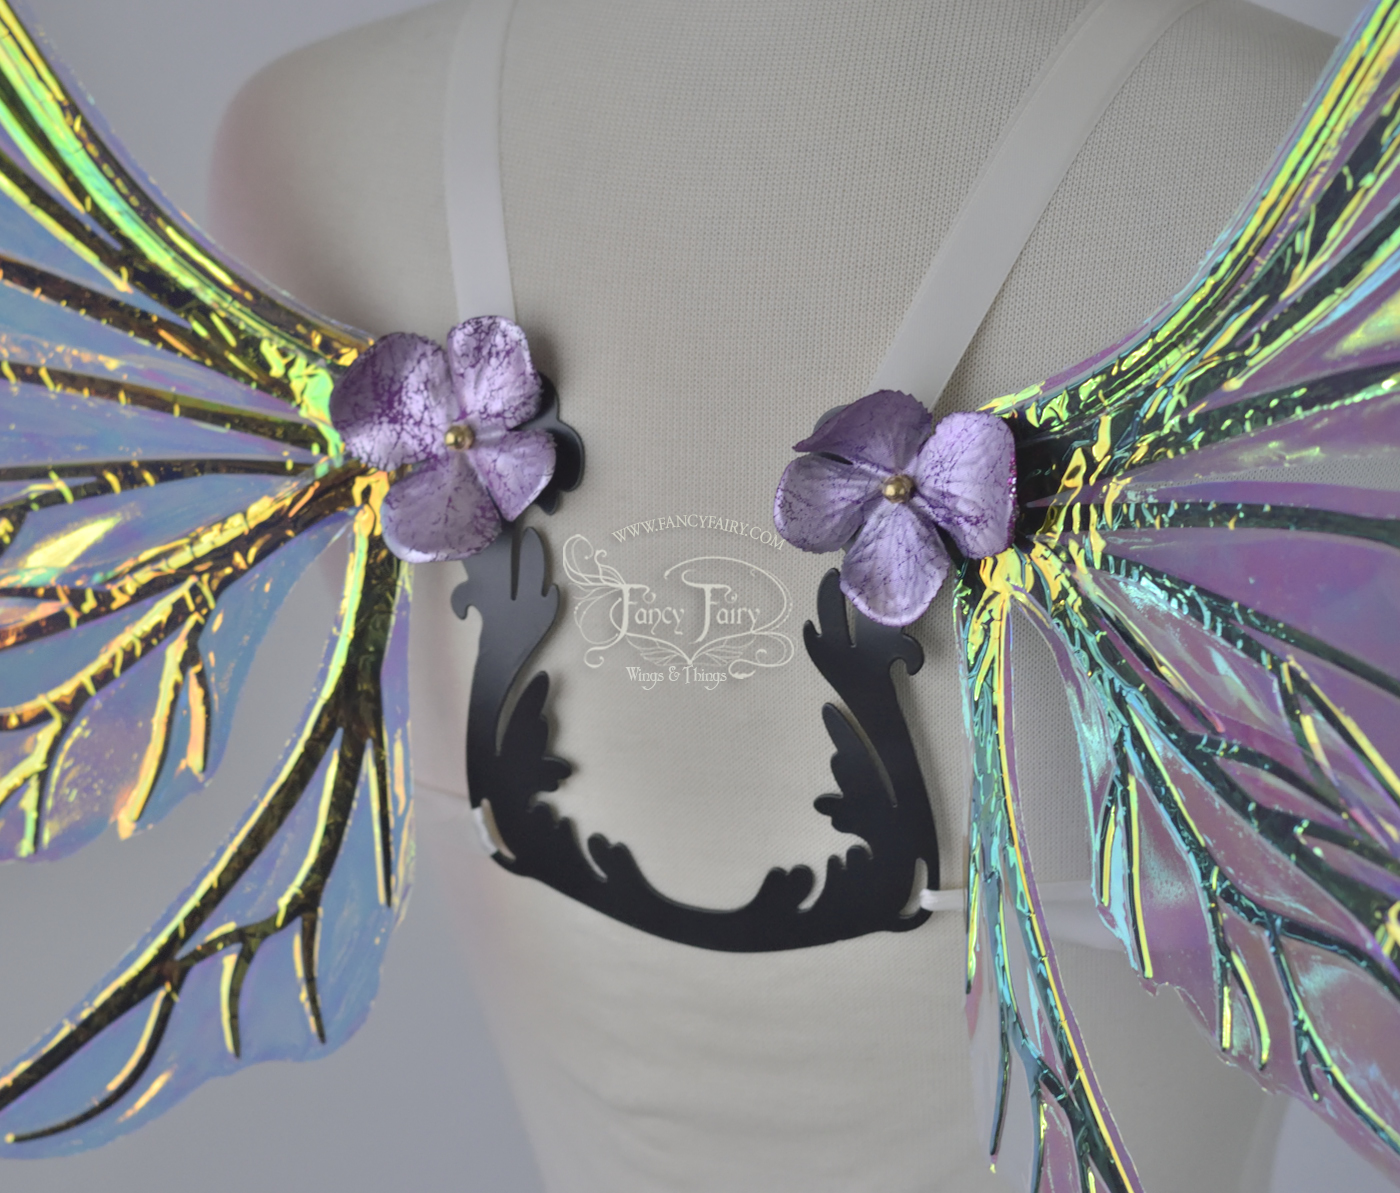 Aynia "Grapevine" Painted Convertible Iridescent Fairy Wings with Black Veins